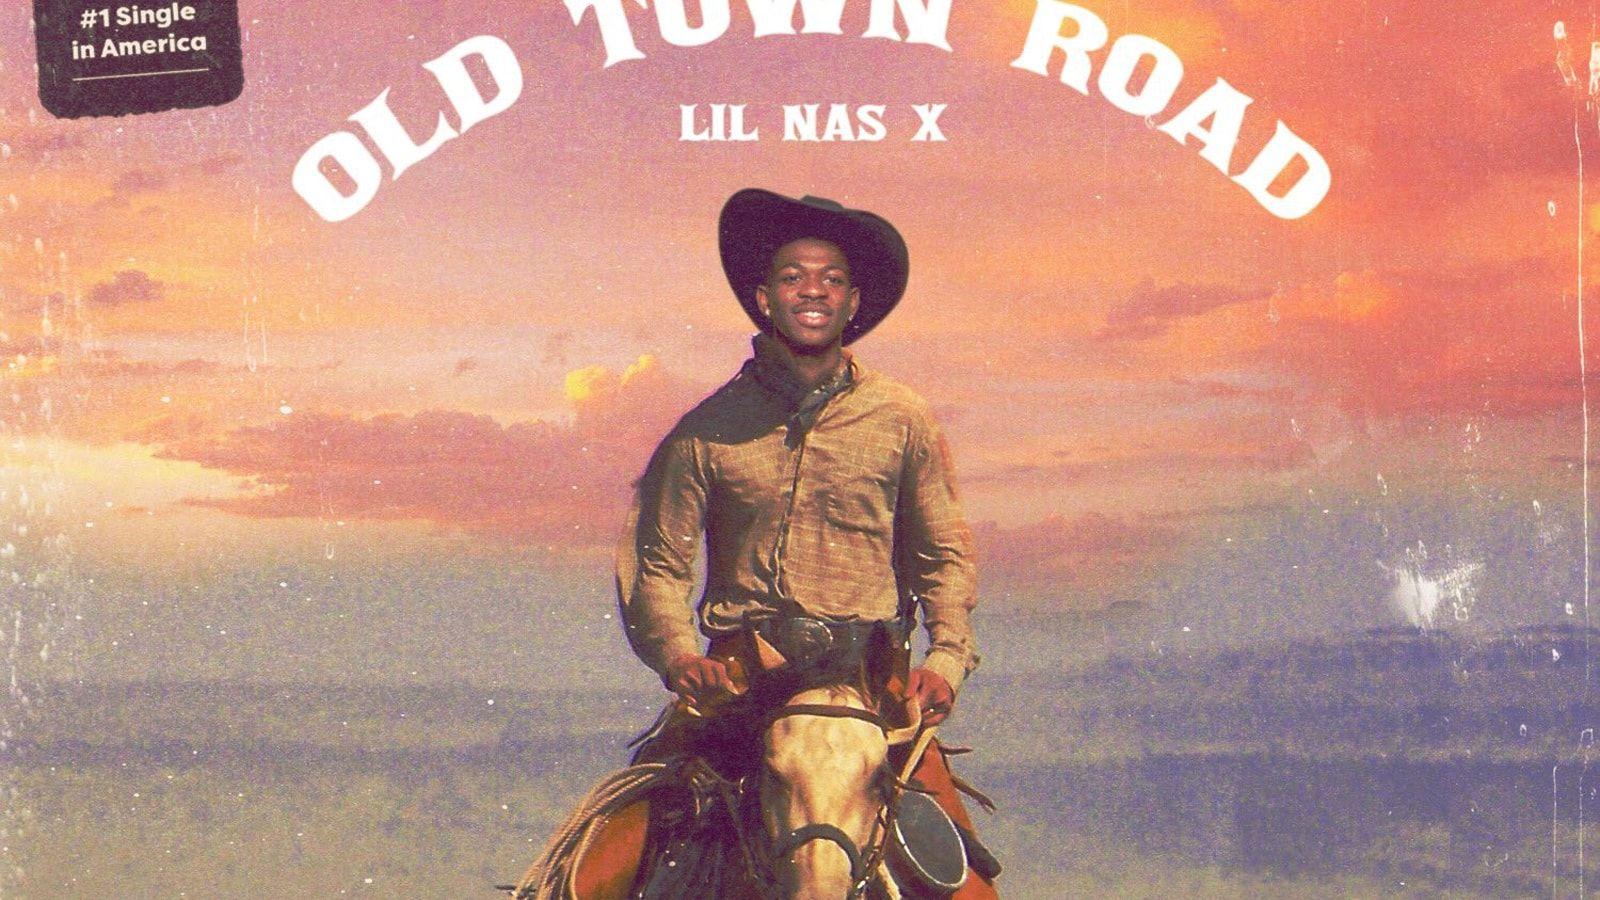 Billy cyrus old town. Lil nas x old Town Road. Old Town обложка. Old Town Road Lil nas x Billy ray Cyrus обложка.